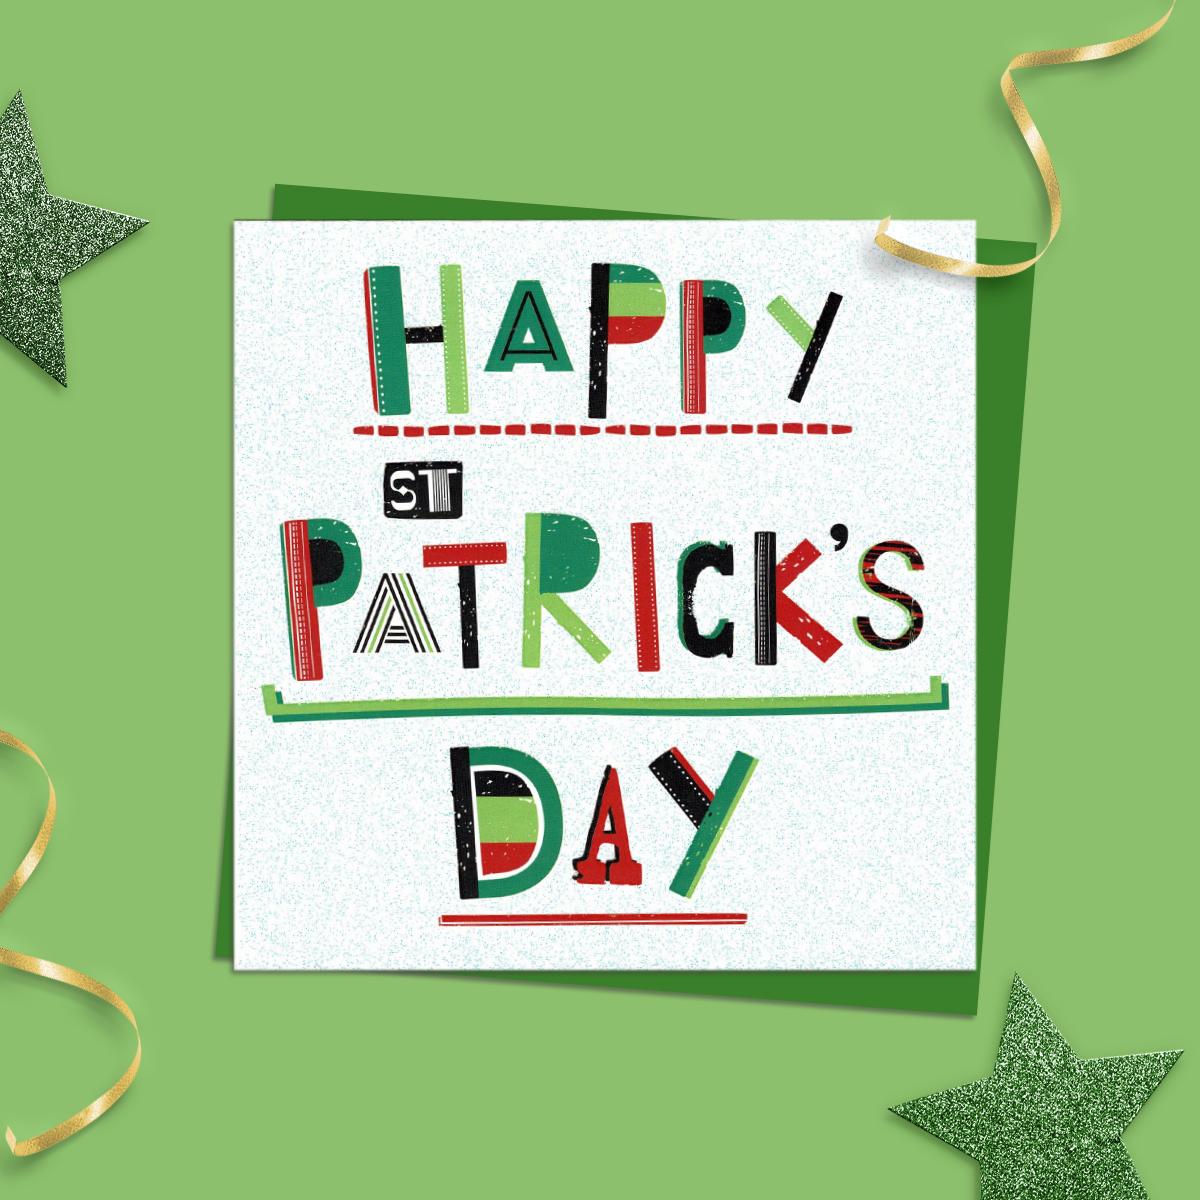 Happy St. Patrick's Day' Card With Colourful Text and Added Sparkle. With Green Envelope